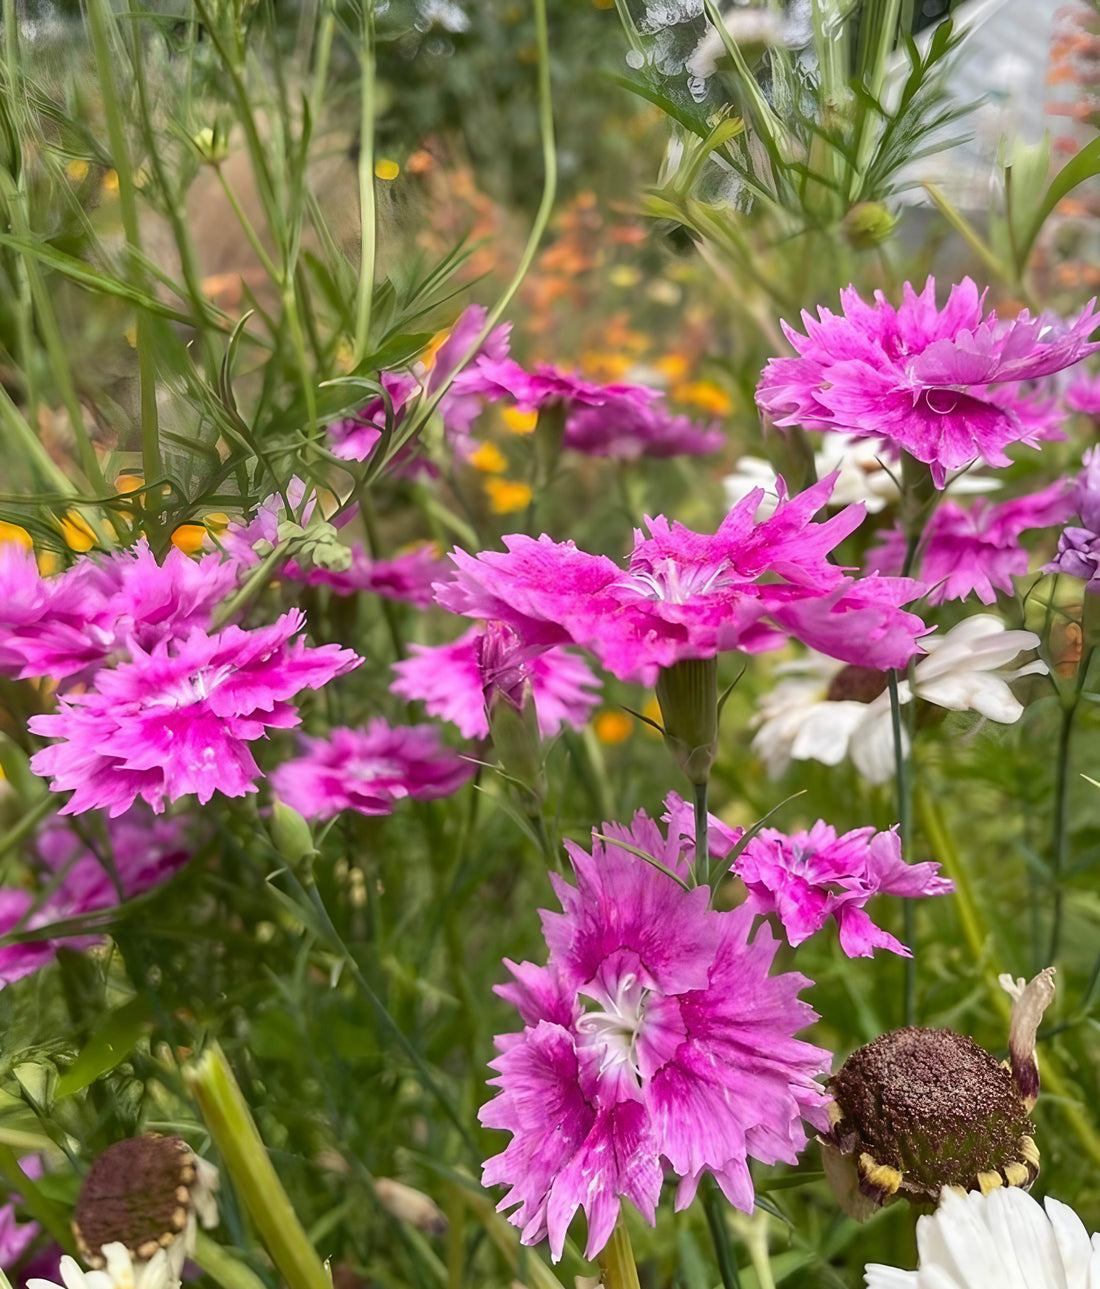 Expansive view of a garden filled with Dianthus Heddewegii Gaiety Single Mix in pink and white